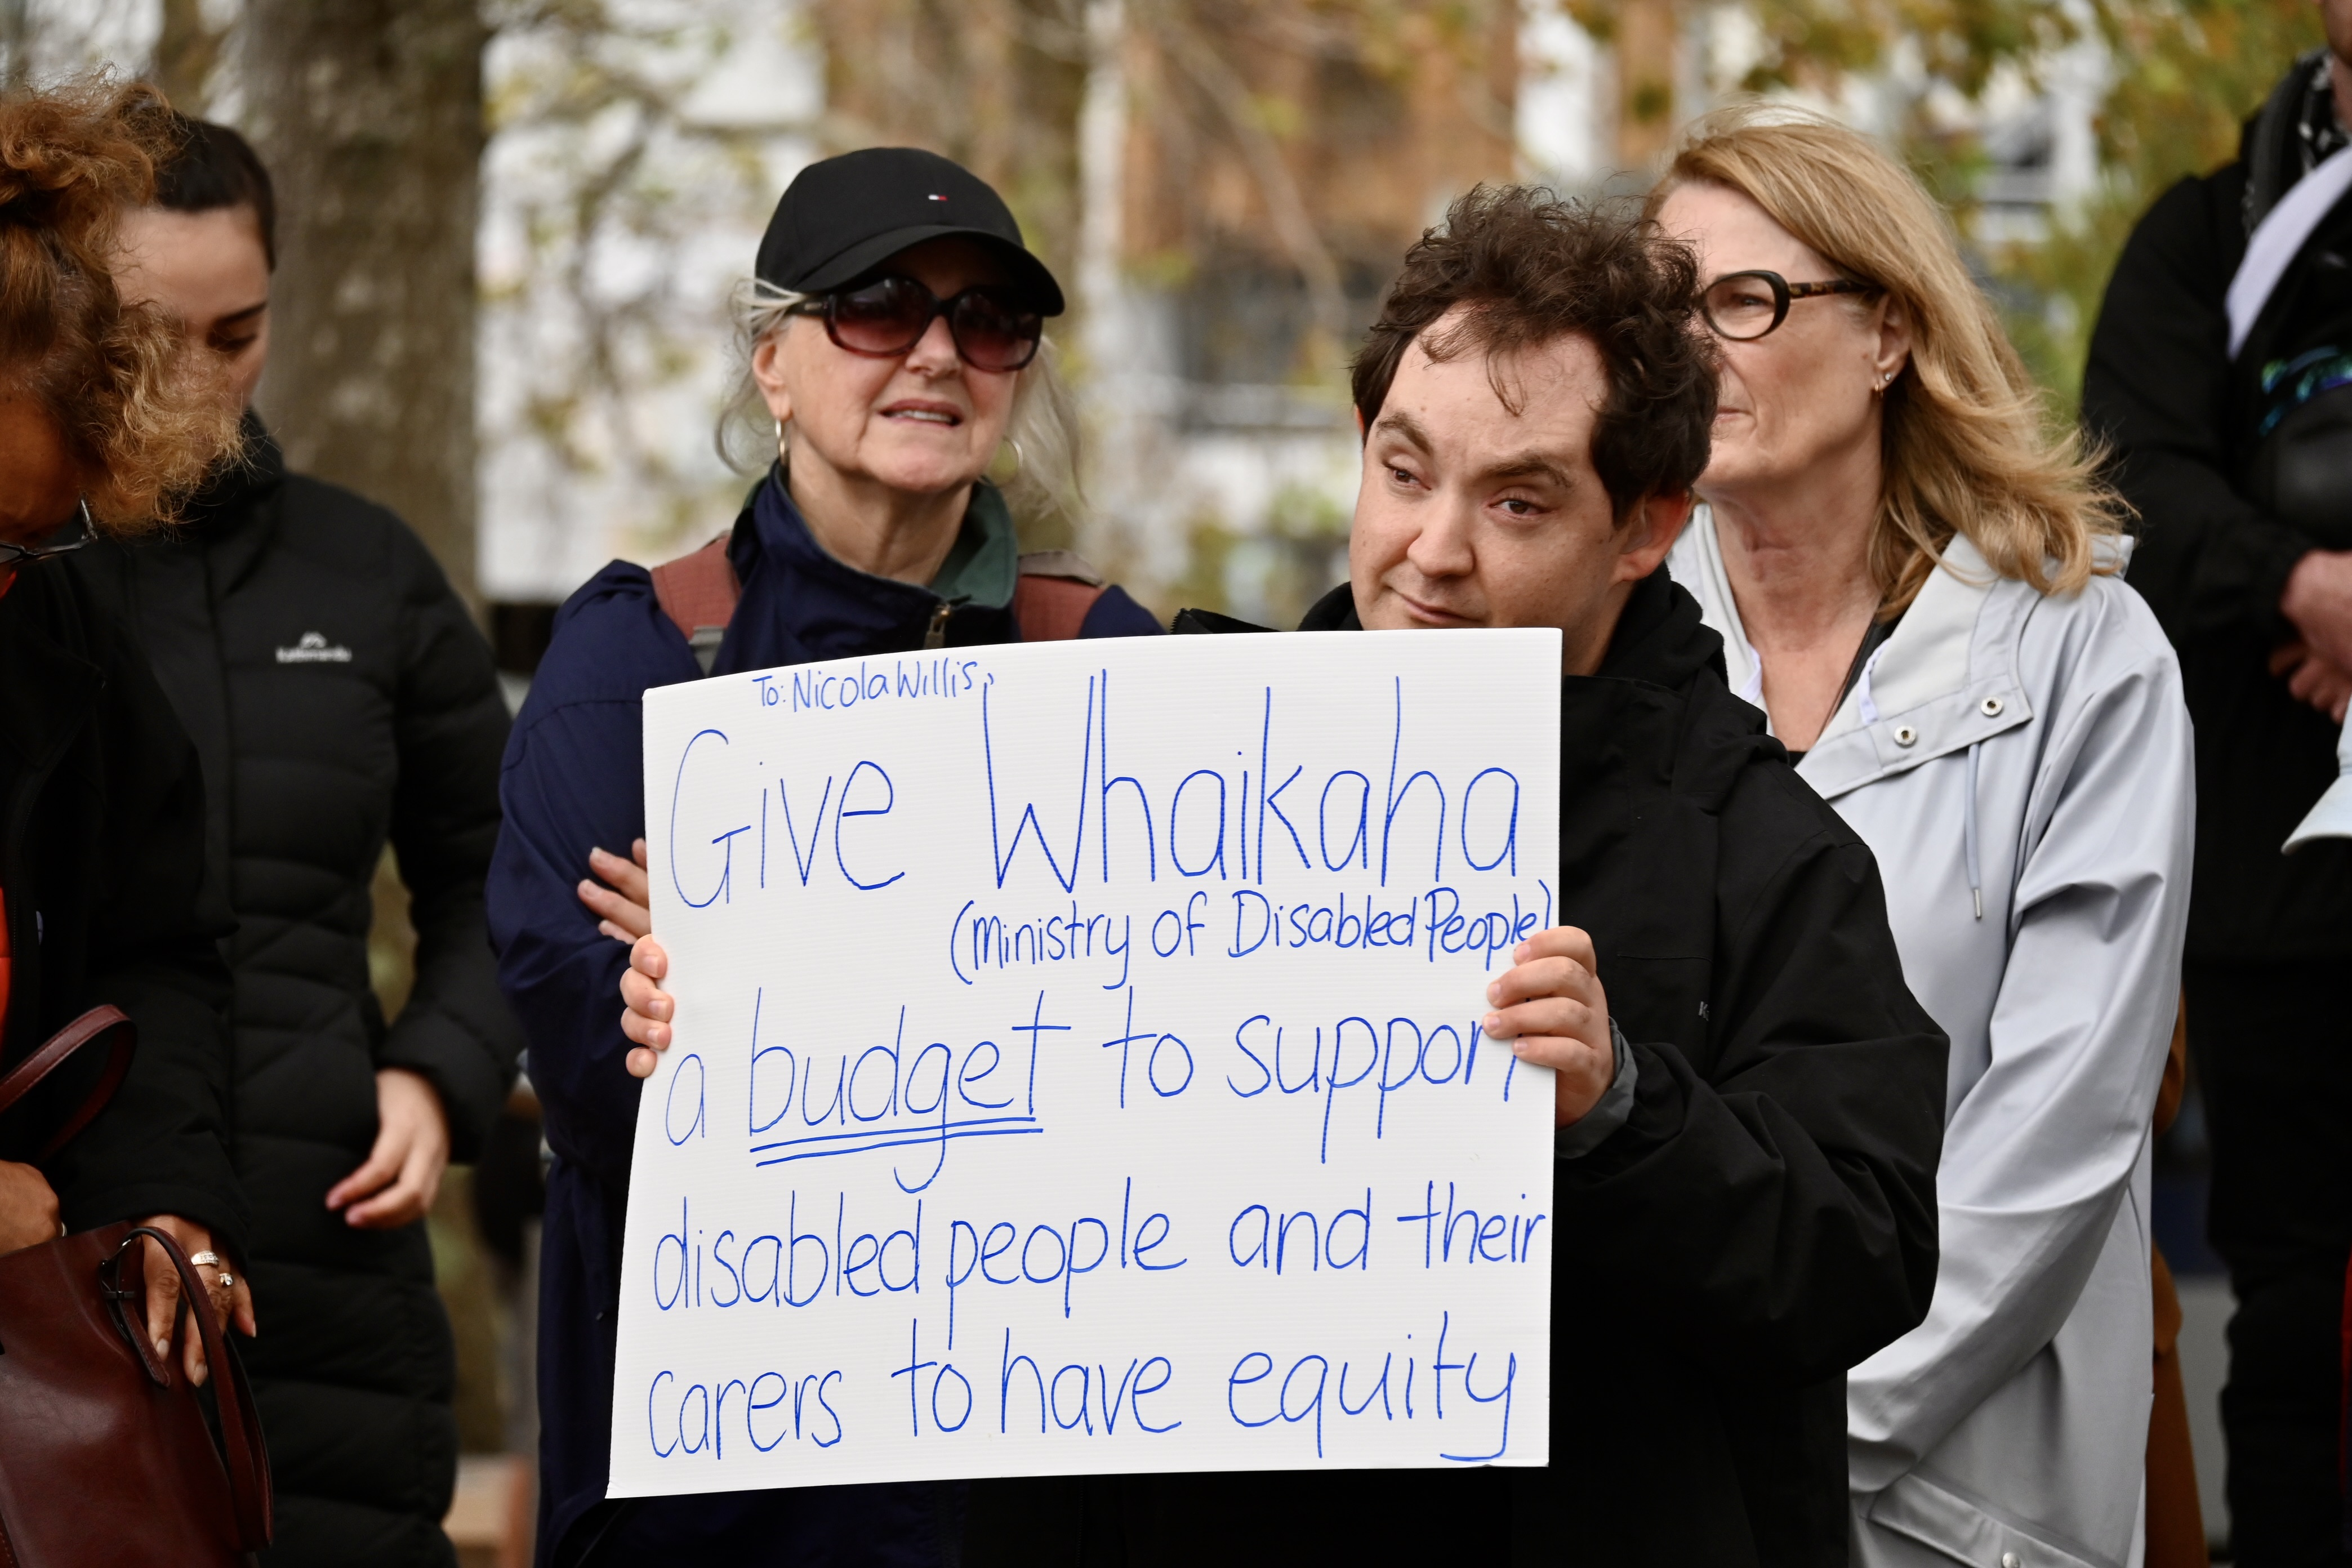 A man holds up a sign that reads: To Nicola Willis, Give Whaikaha (Ministry of Disabled People) a budget to support disabled people and their carers to have equity.